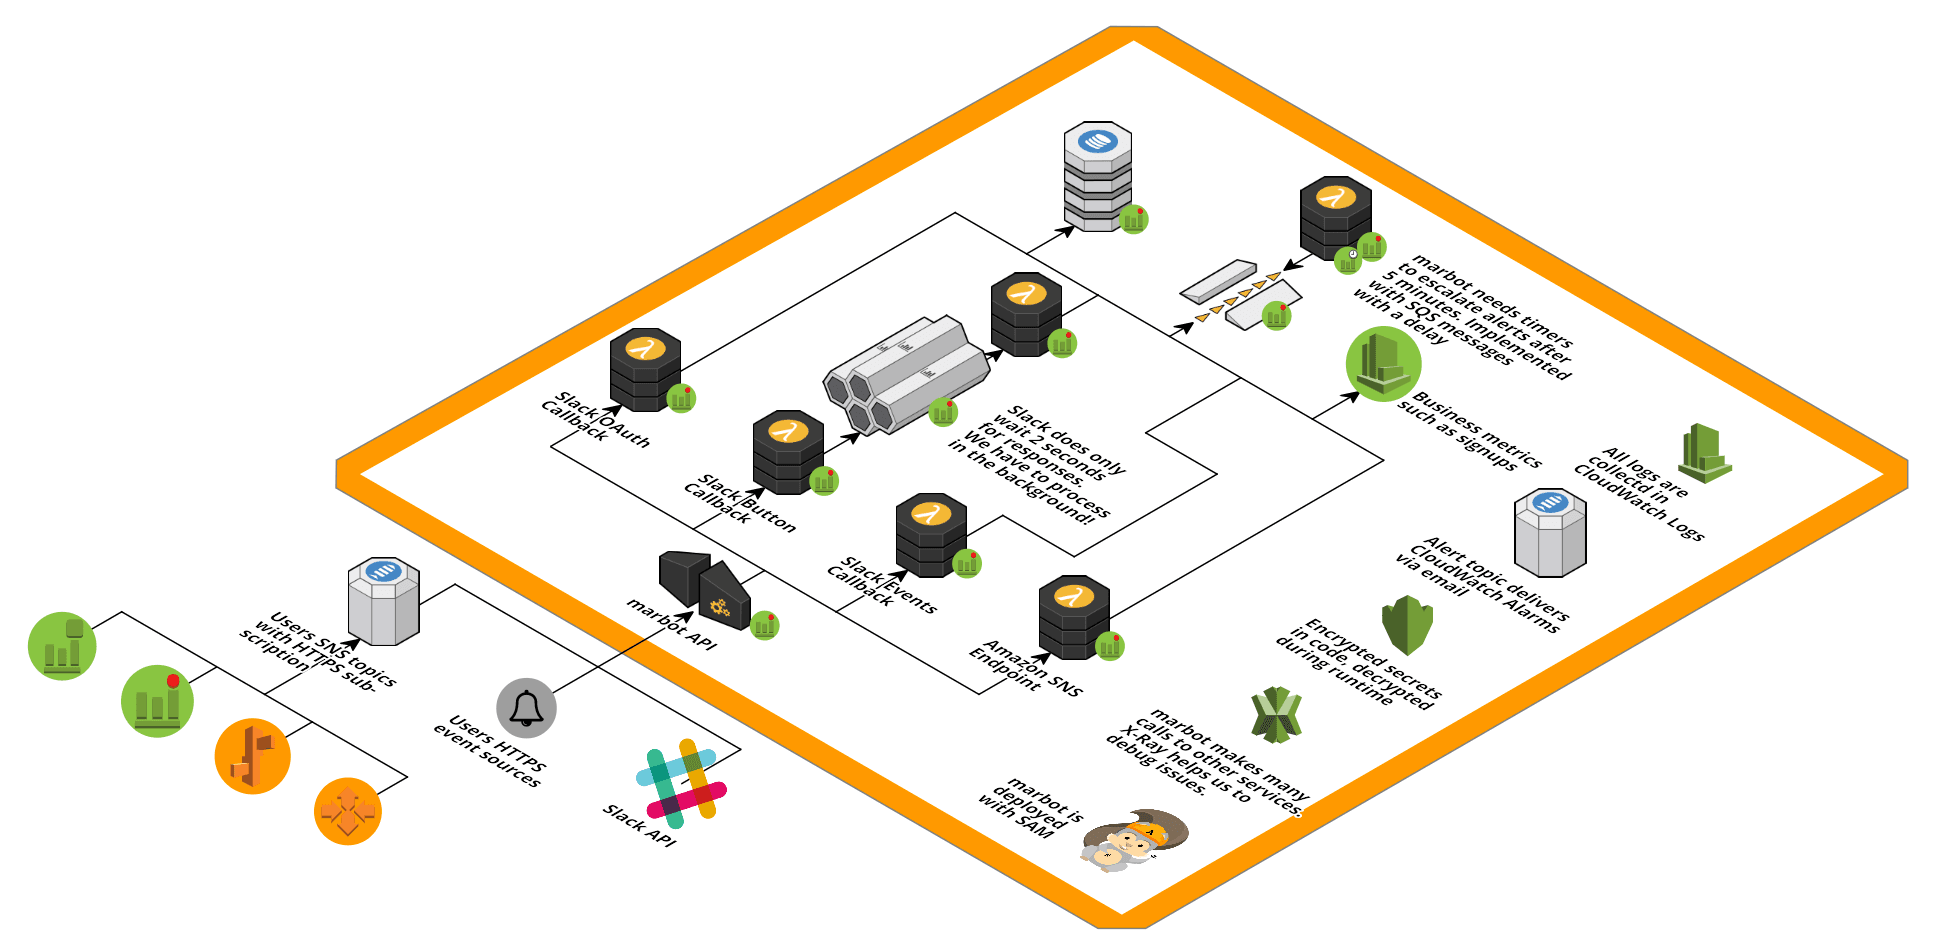 Lessons learned: Serverless Chatbot architecture for marbot